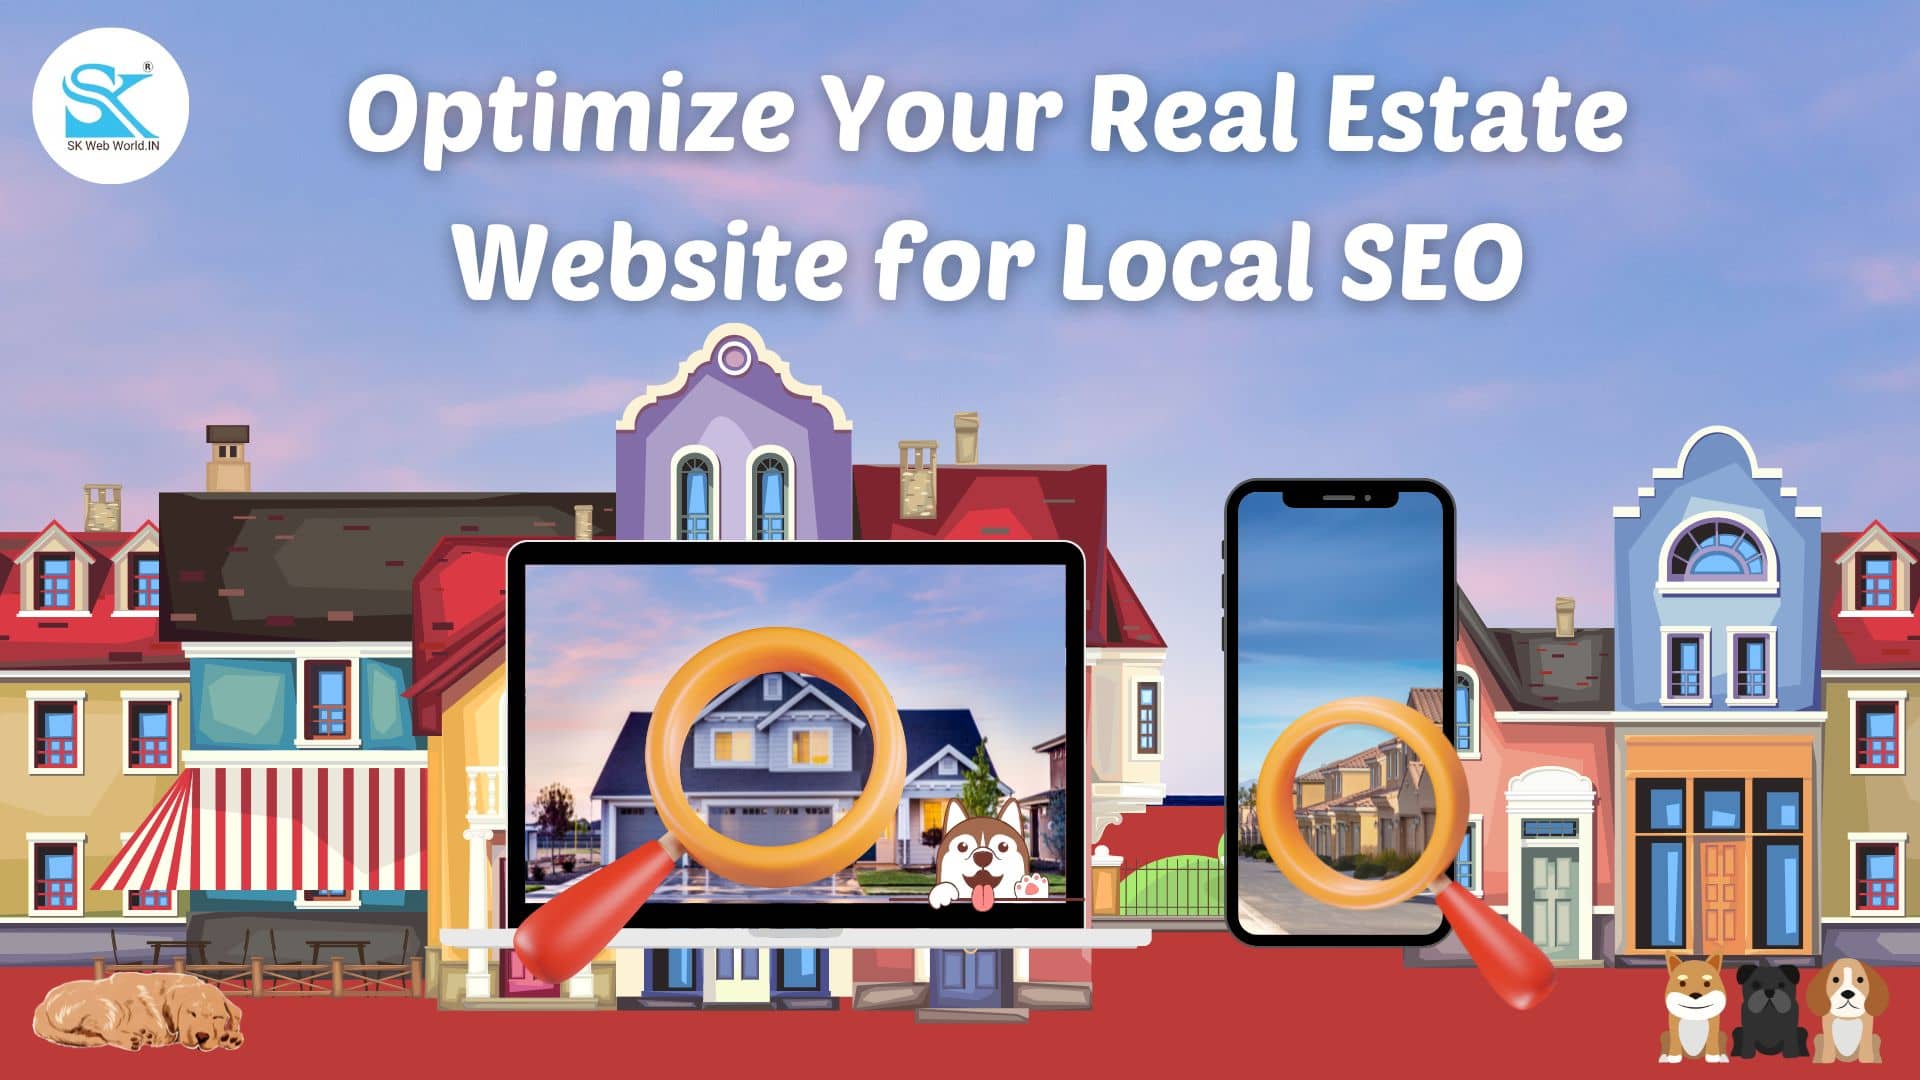 You are currently viewing How to Optimize Your Real Estate Website for Local SEO: A Guide for Small Businesses in West Bengal